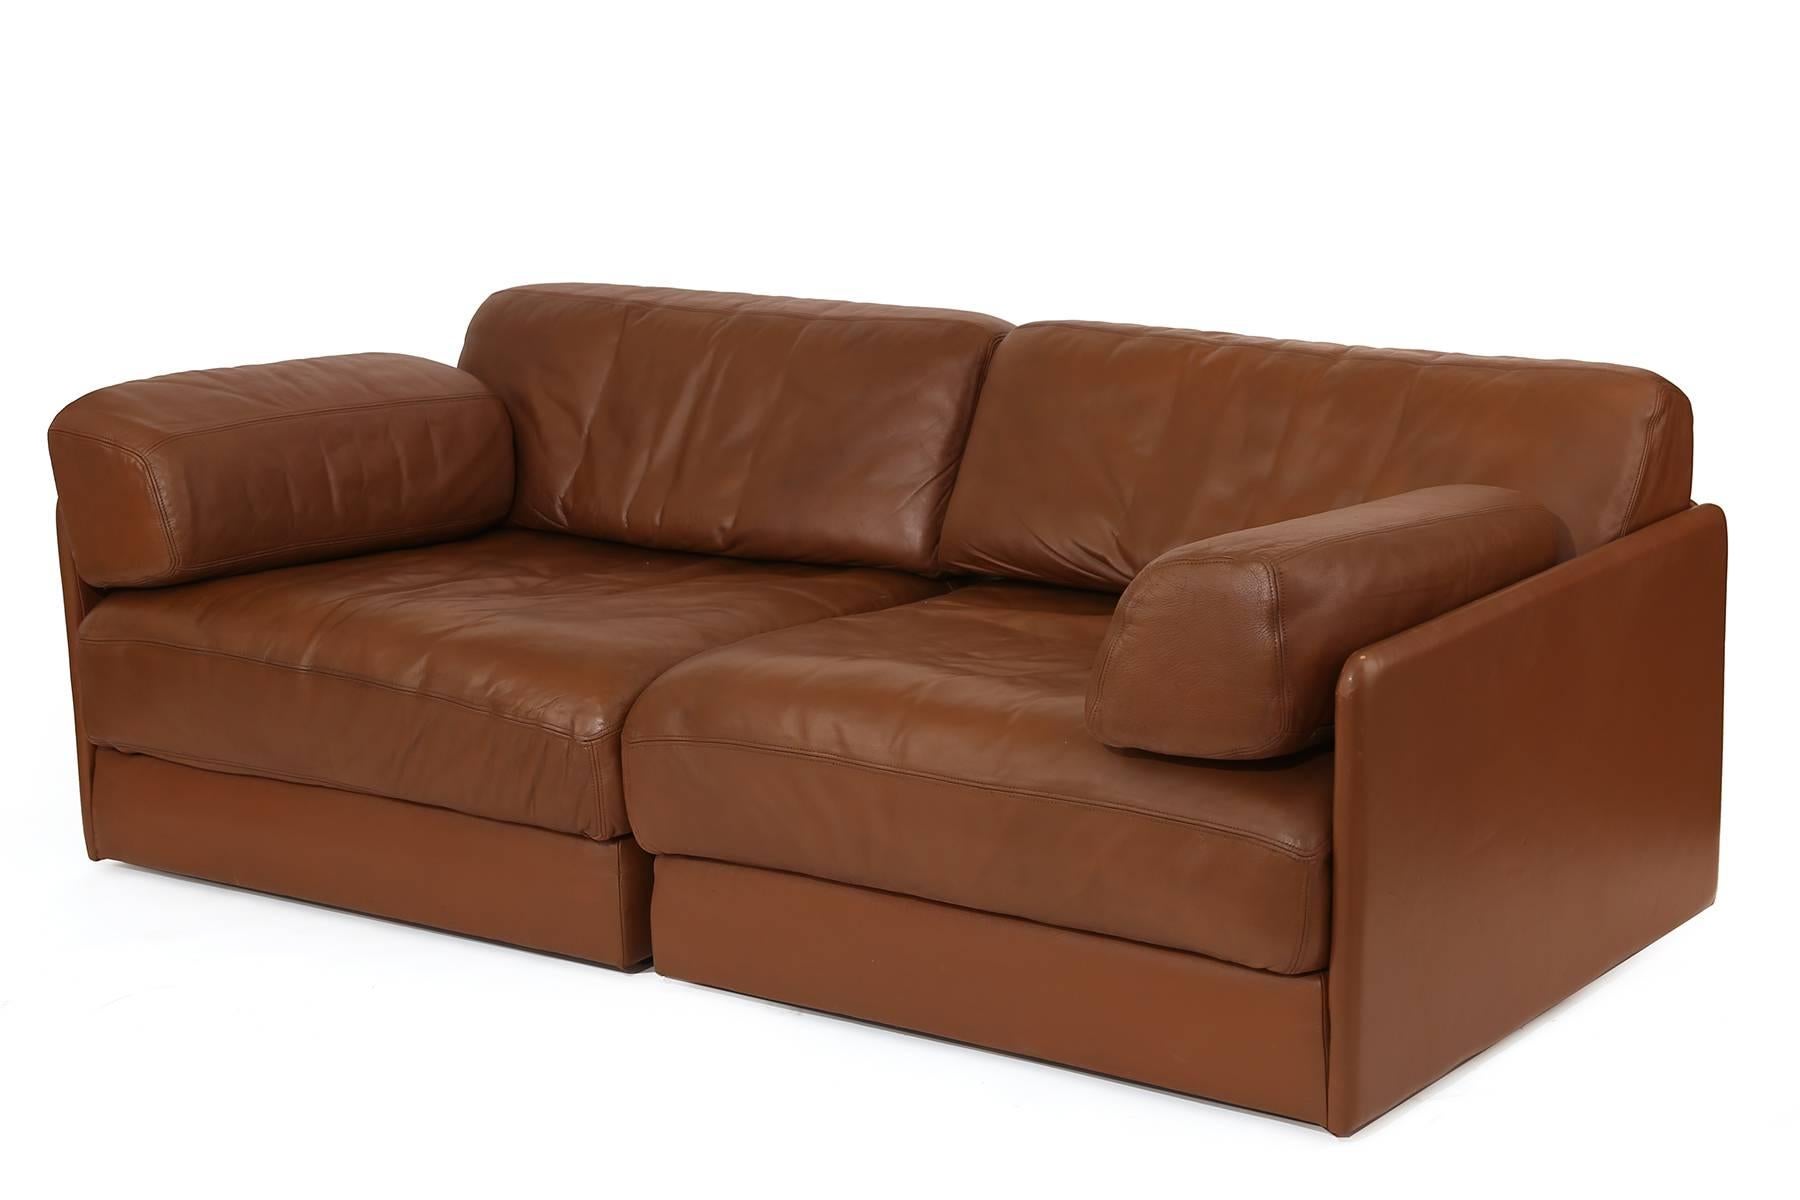 De Sede leather chairs or sofa, circa mid-1970s. These examples are done in their original supple milk chocolate leather and can be used as individual chairs or as a smaller sofa.
Cushions are removable to create a large sleeping area.
 